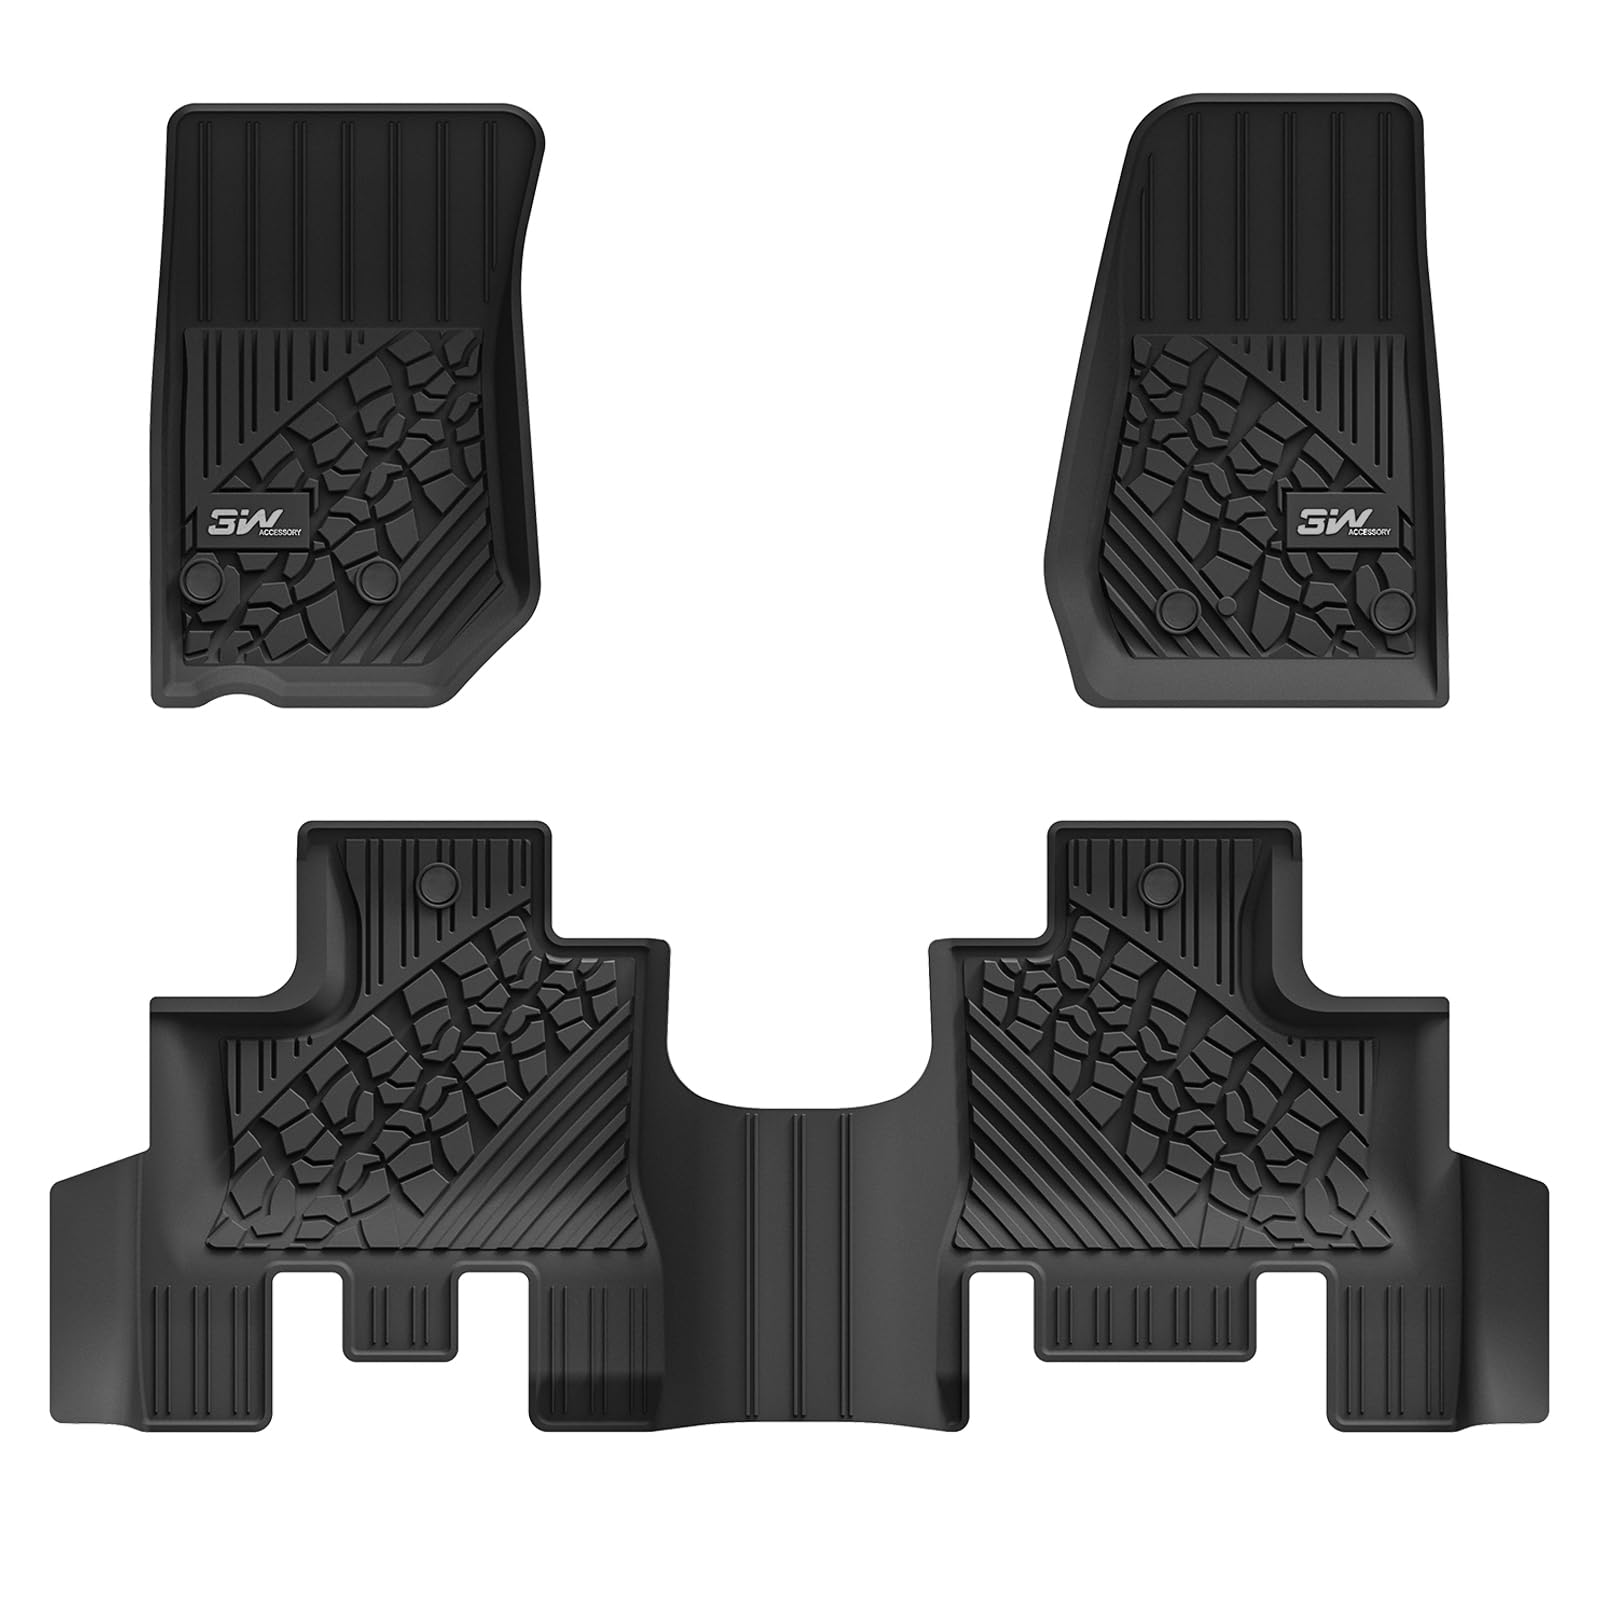 3W Jeep Wrangler JKU 2013-2018 Unlimited 4 Door Only Custom Floor Mats TPE Material & All-Weather Protection Vehicles & Parts 3w 2013-2018 Wrangler JK 2013-2018 1st&2nd Row Mats